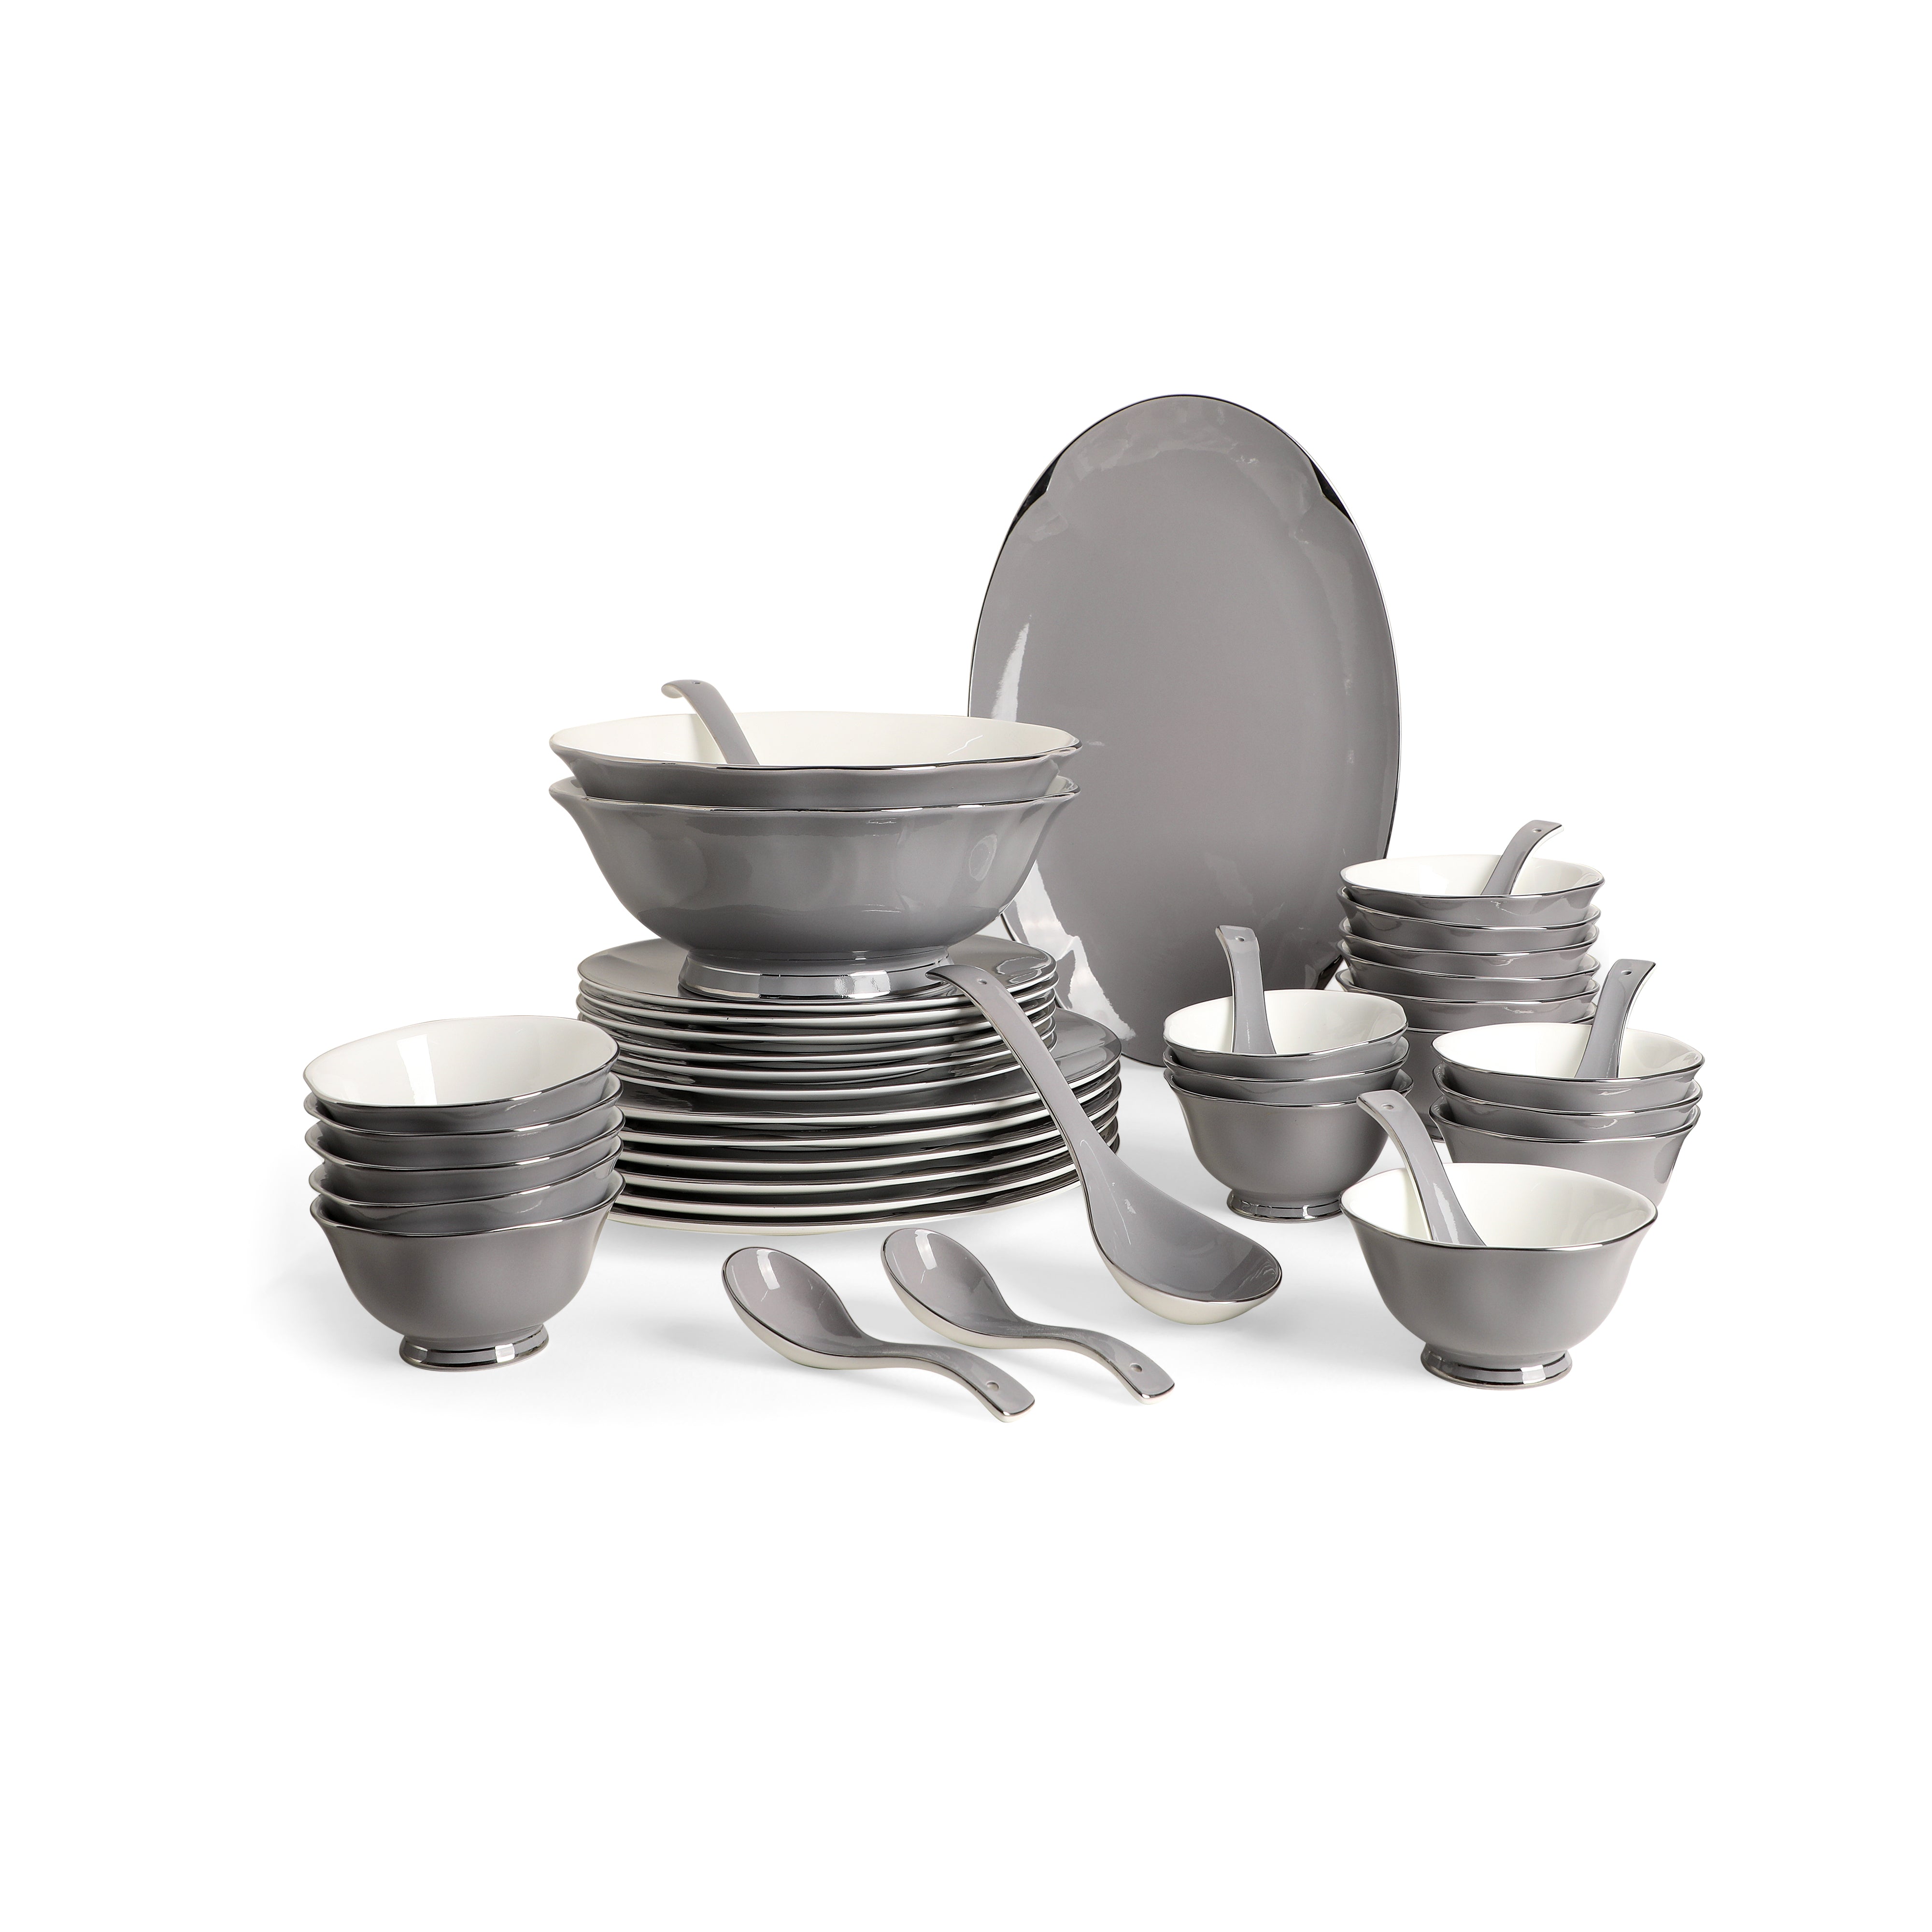 THE HOME CO. Dinner Set Of 41 Pcs - Grey Porcelain With Silver Plated_14